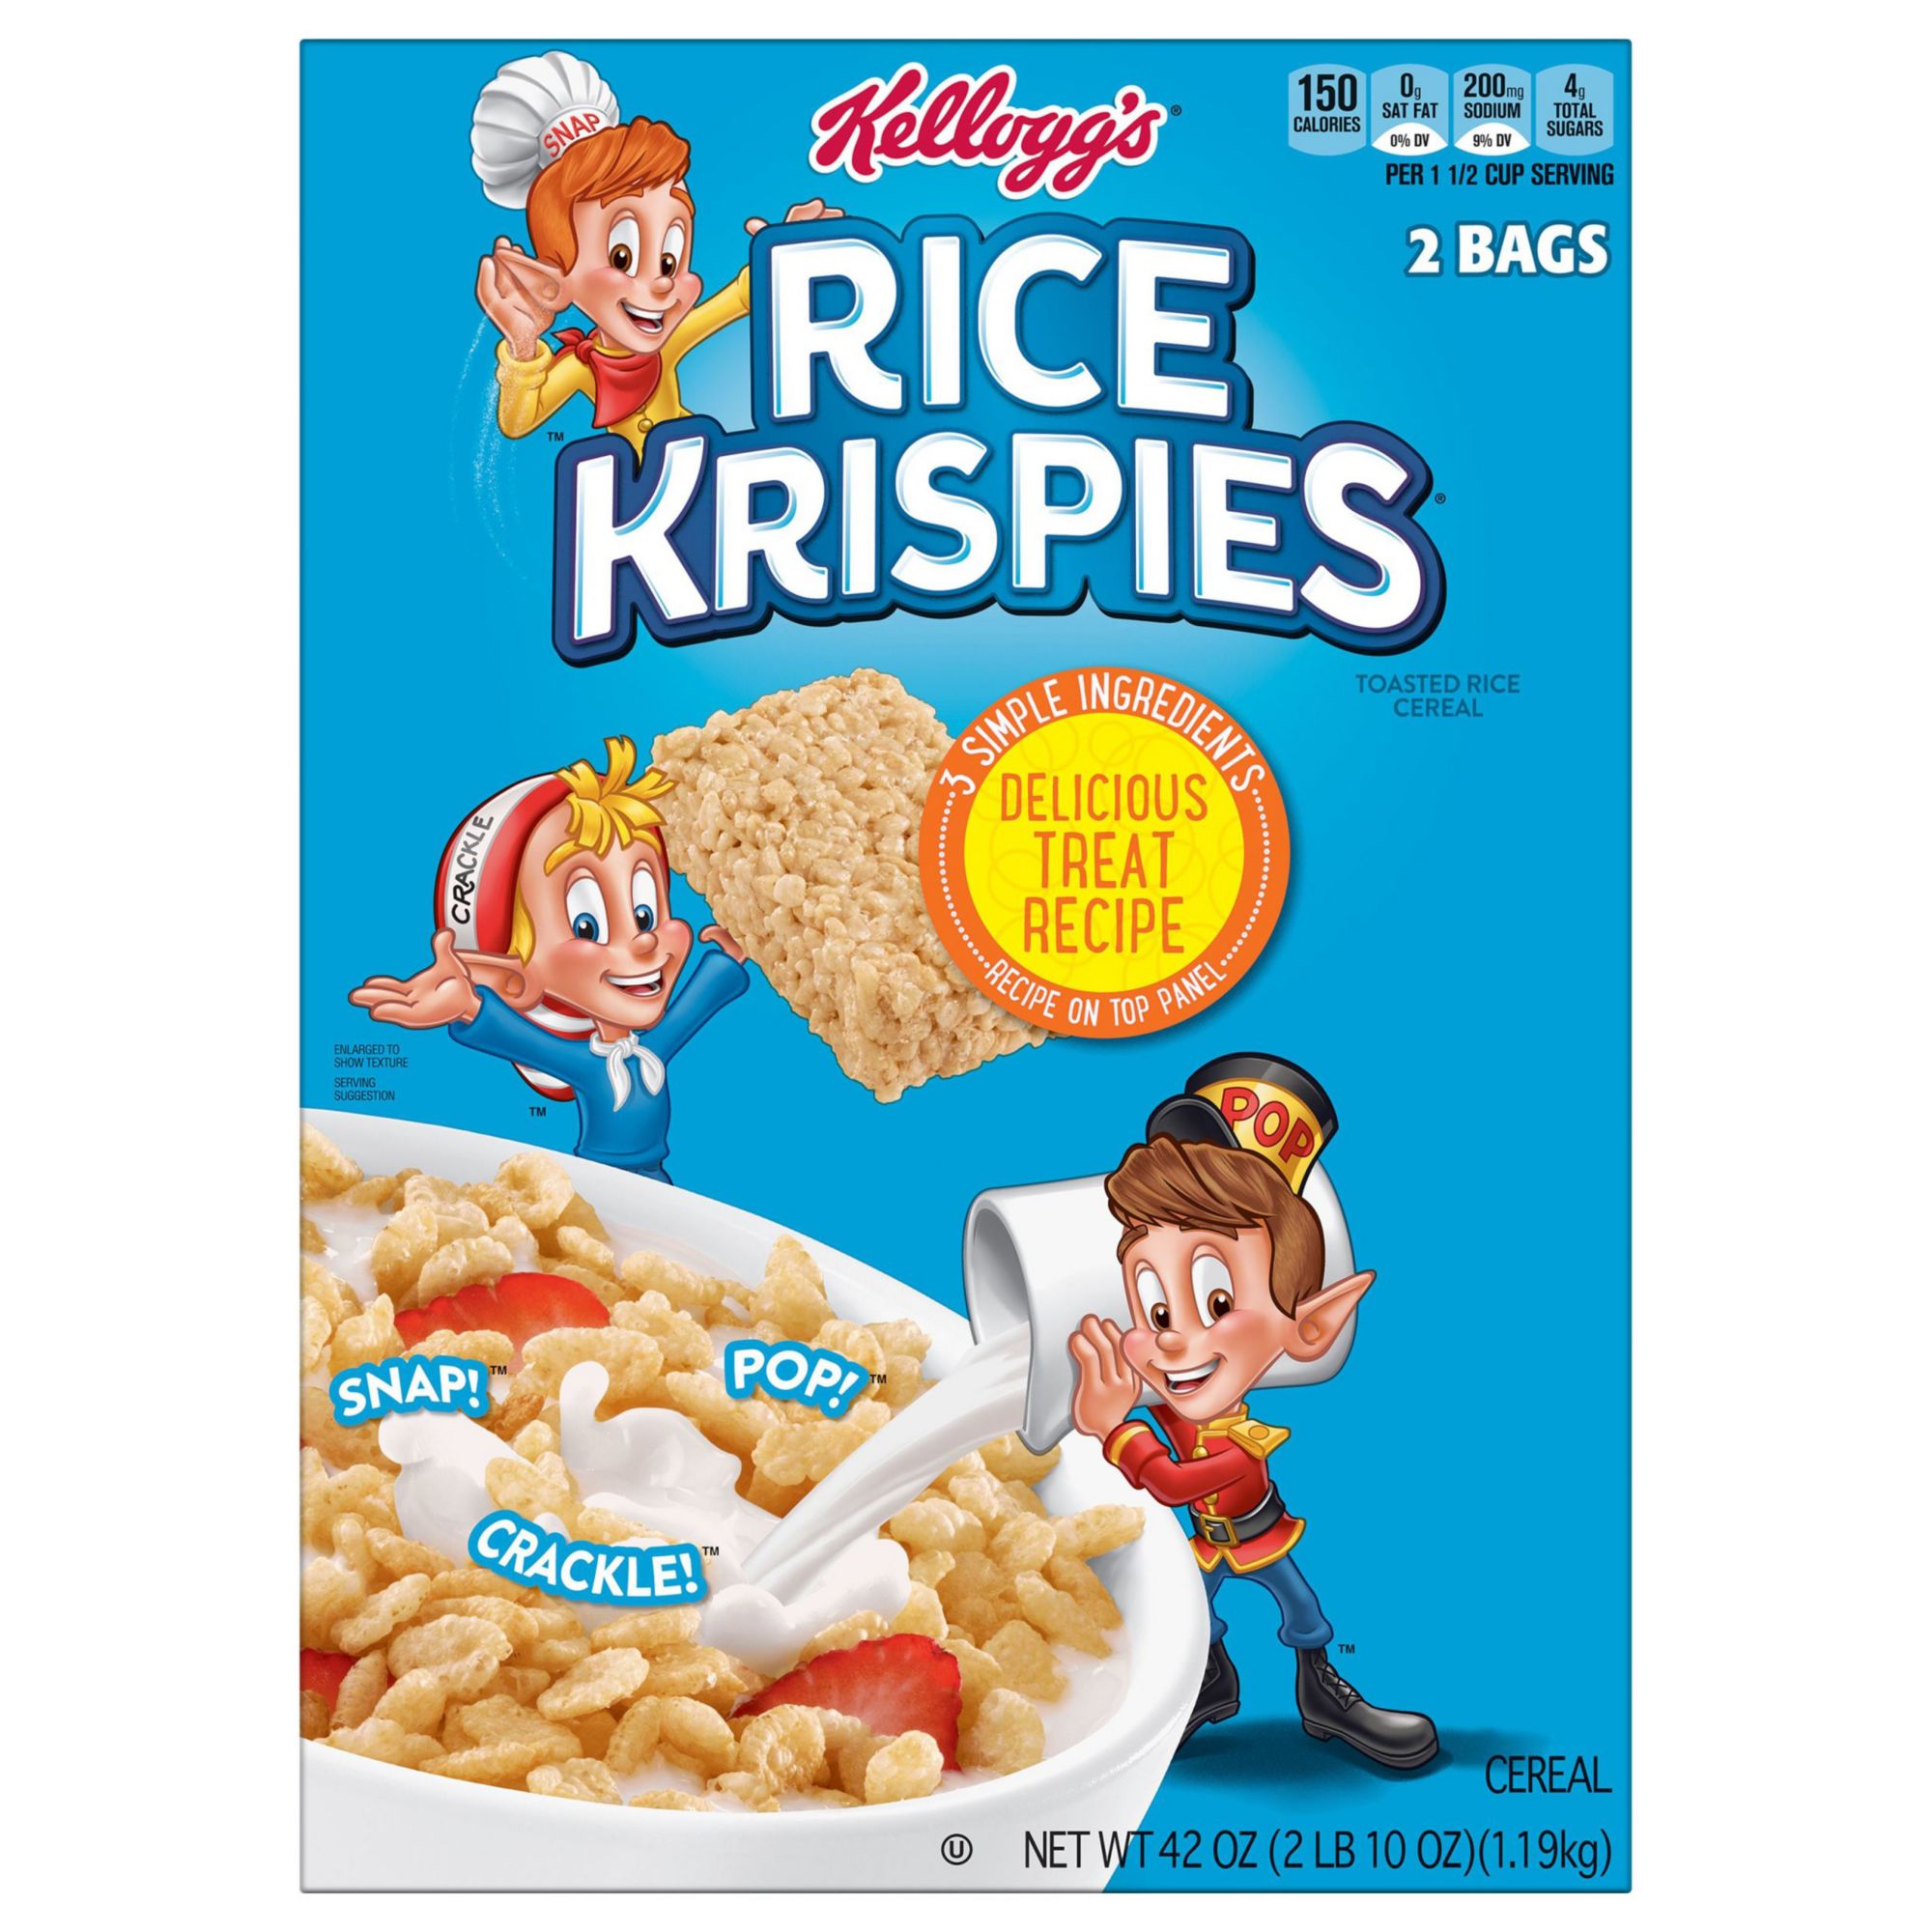  Kellogg's Corn Flakes Cold Breakfast Cereal, 8 Vitamins and  Minerals, Healthy Snacks, Family Size, Original (6 Boxes)